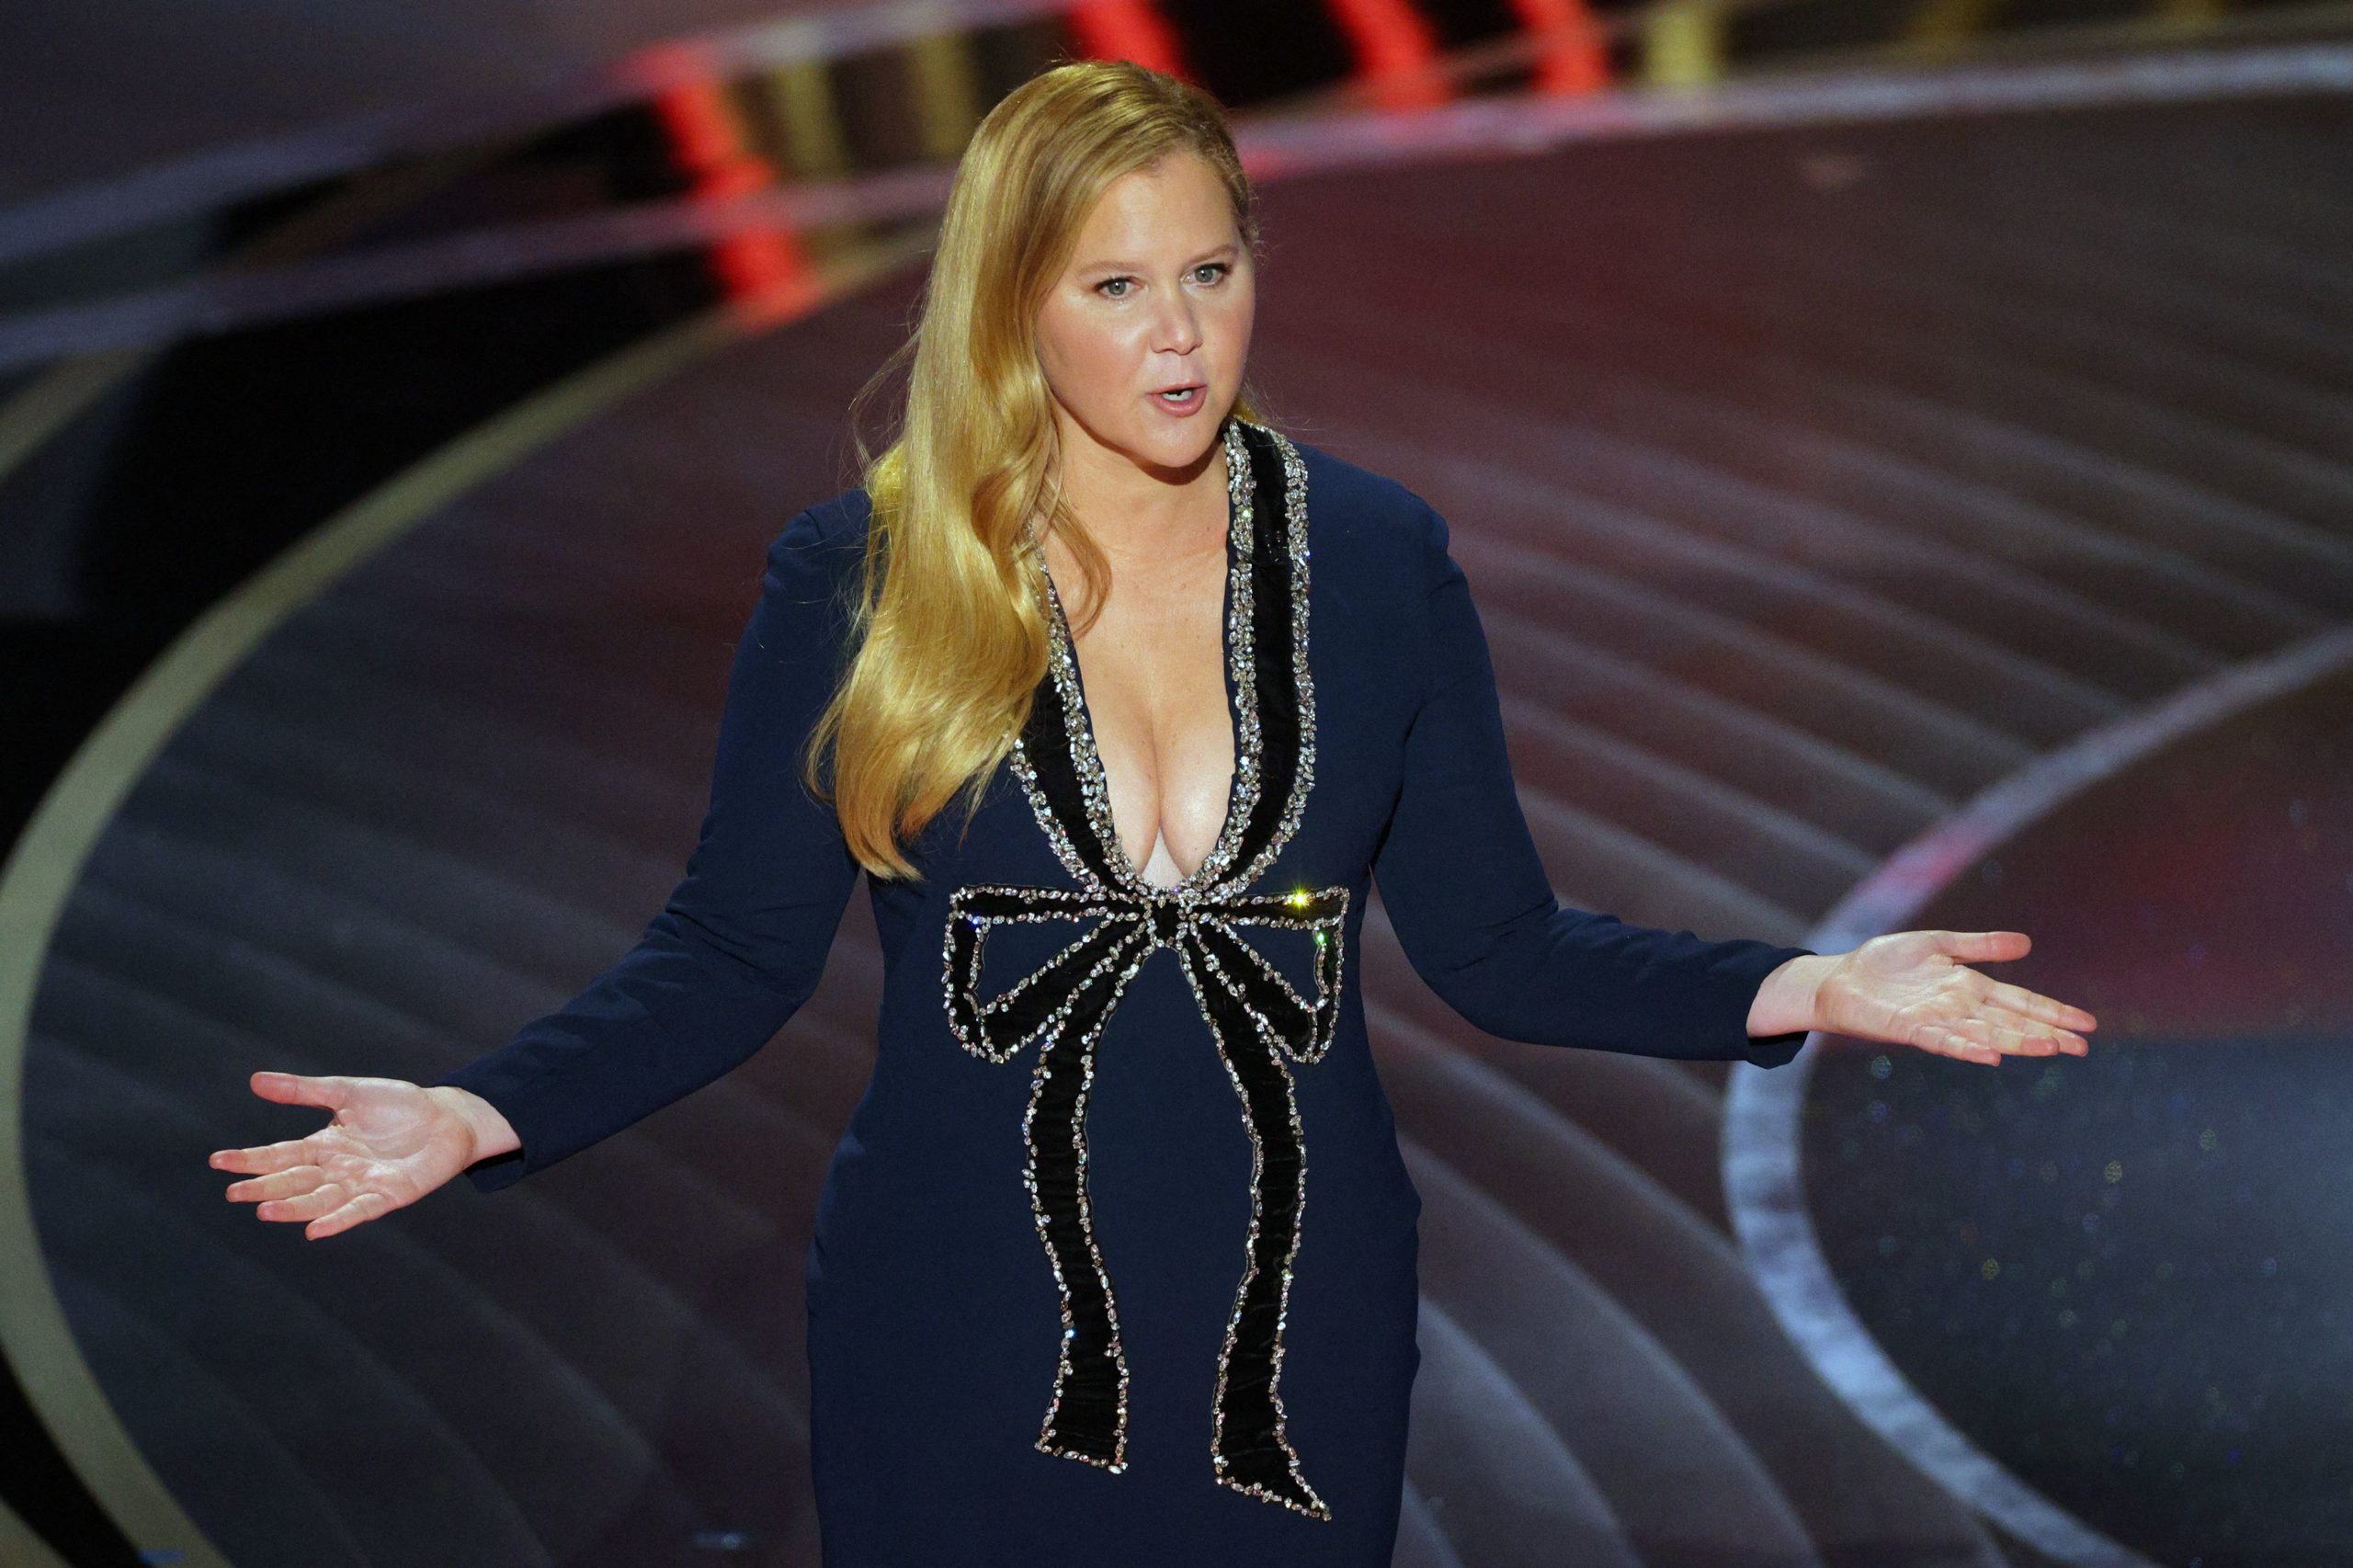 Co-host Amy Schumer speaks to the audience at the 94th Academy Awards in Hollywood, Los Angeles, California, U.S., March 27, 2022. REUTERS/Brian Snyde